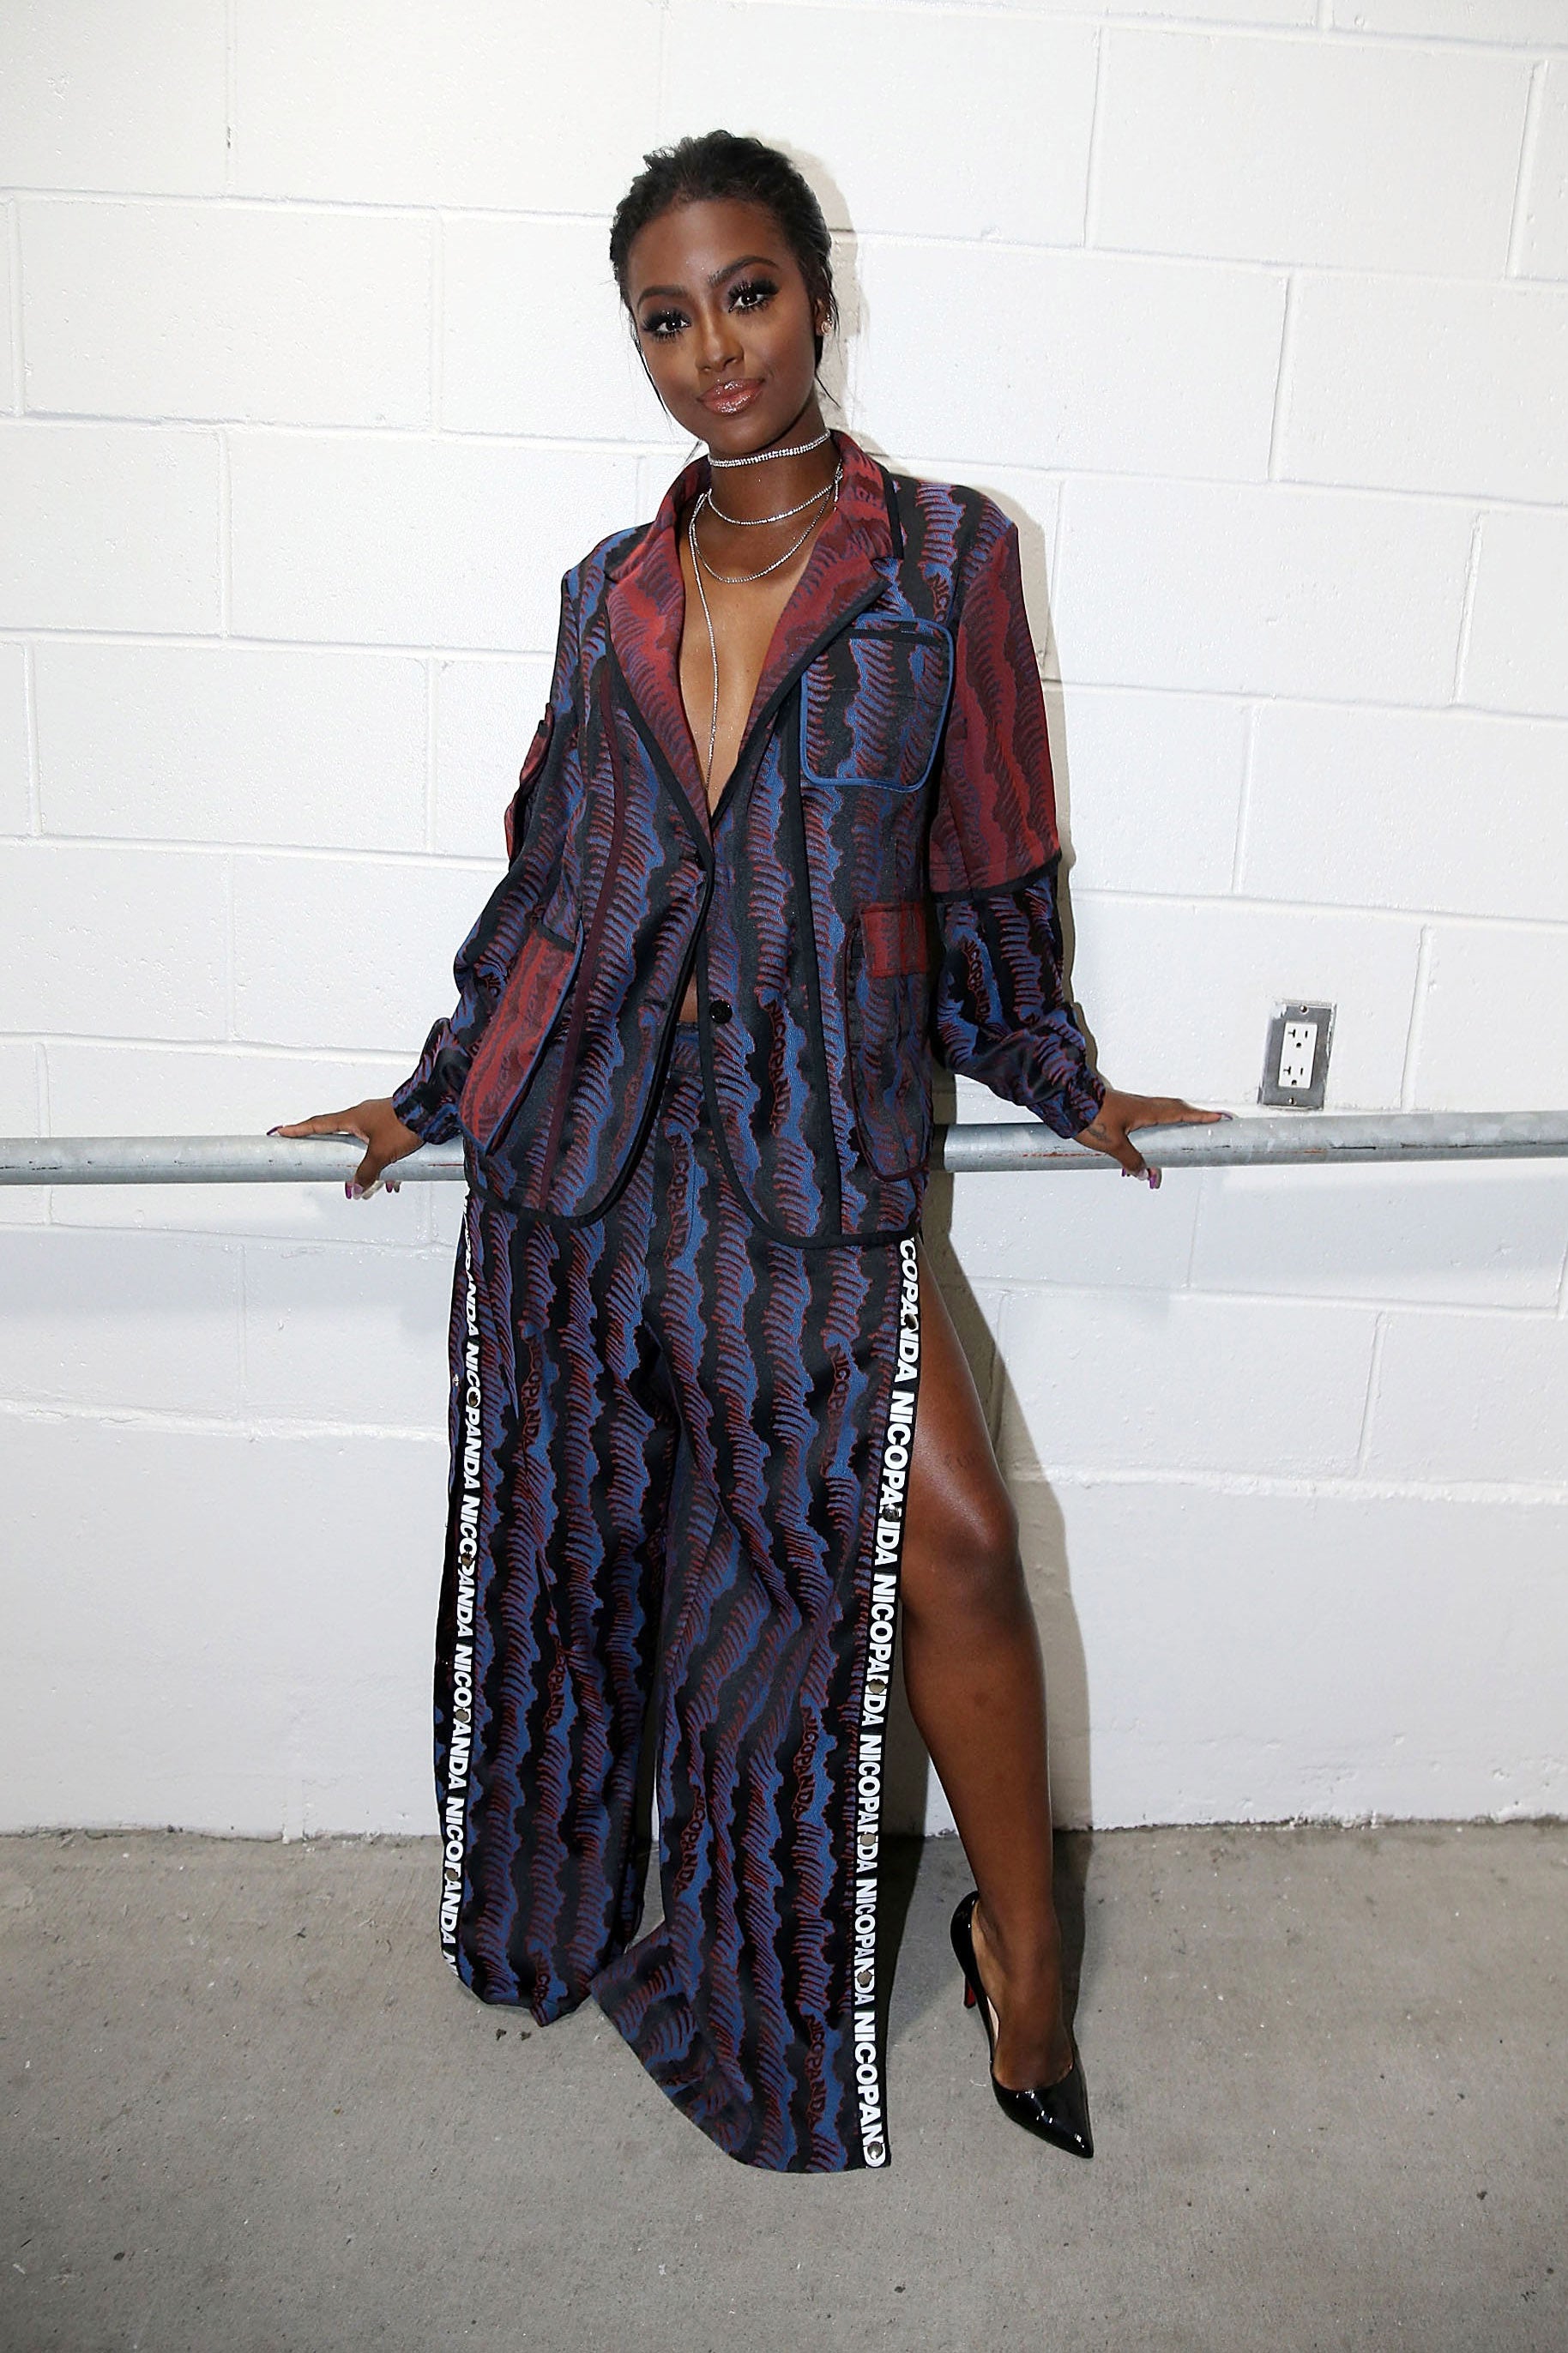 The Hottest Celeb Looks From the Tidal x 1015 Concert
